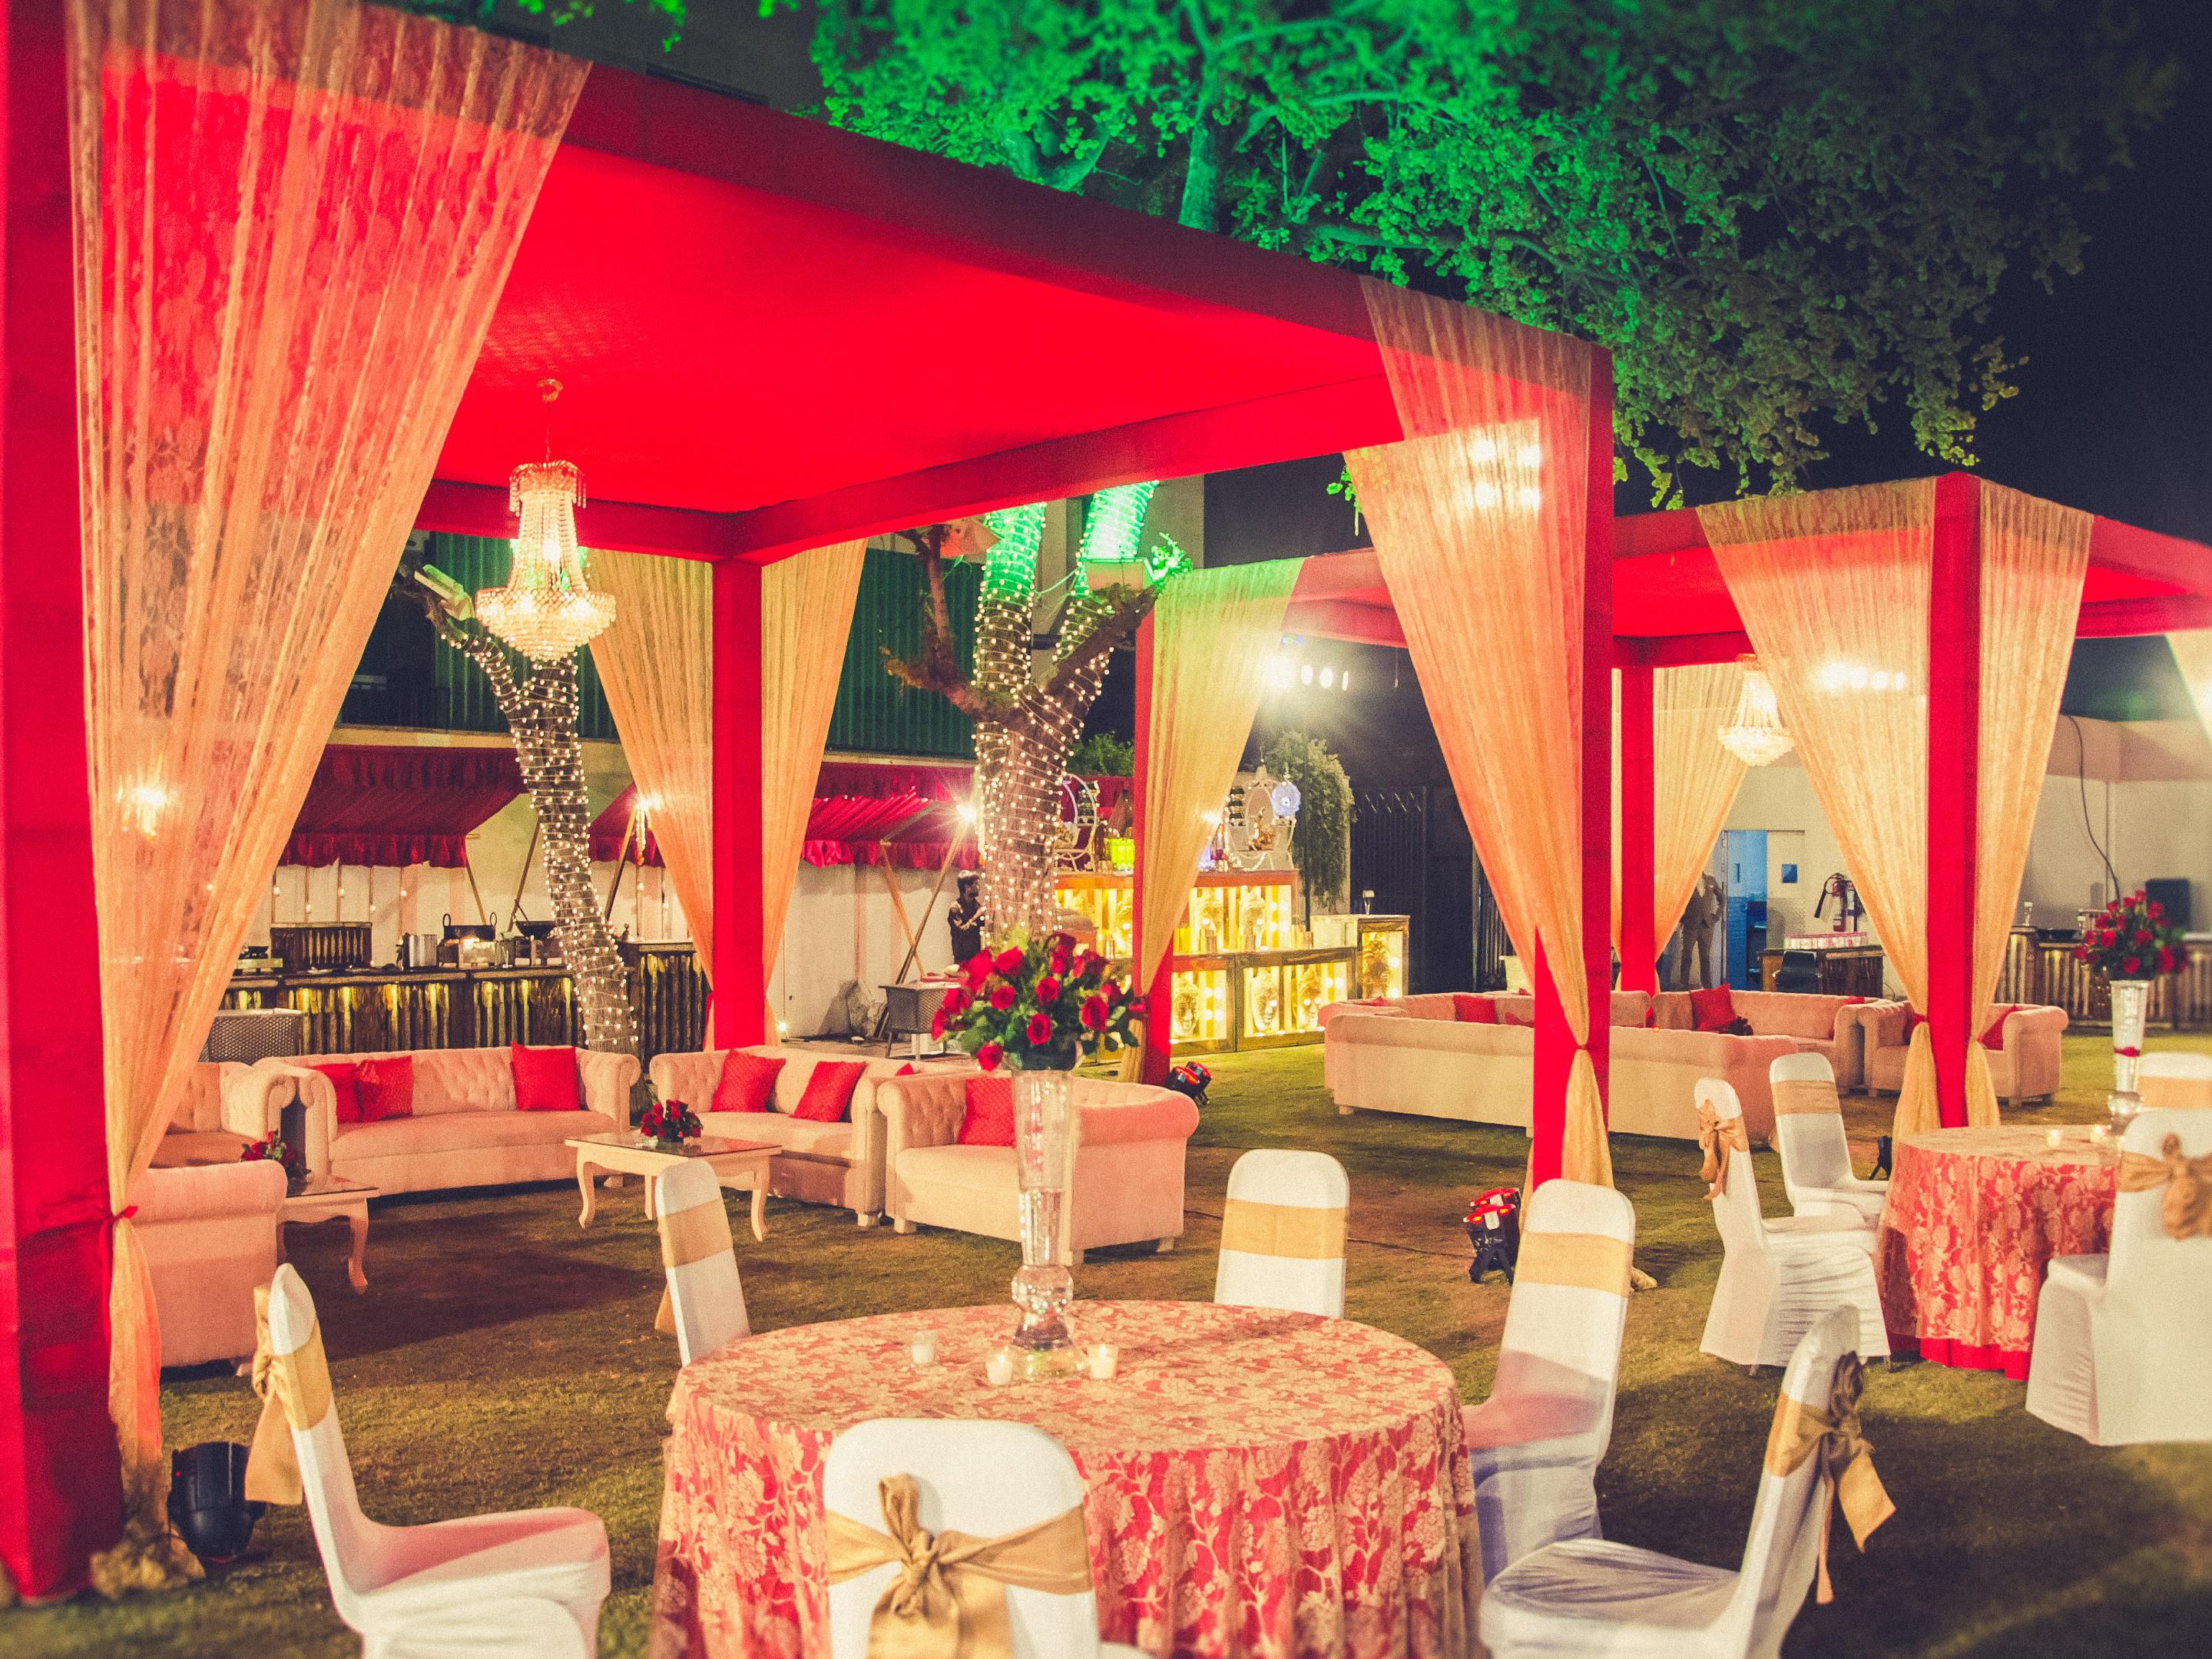 The palatial 26000 sq. ft. Kingston Lawn can have uber phenomenal weddings, receptions, and more — it is where dream events manifest into reality. From Mehendi to other nuptial ceremonies, this spacious lawn is the top choice for hosting beautiful events.